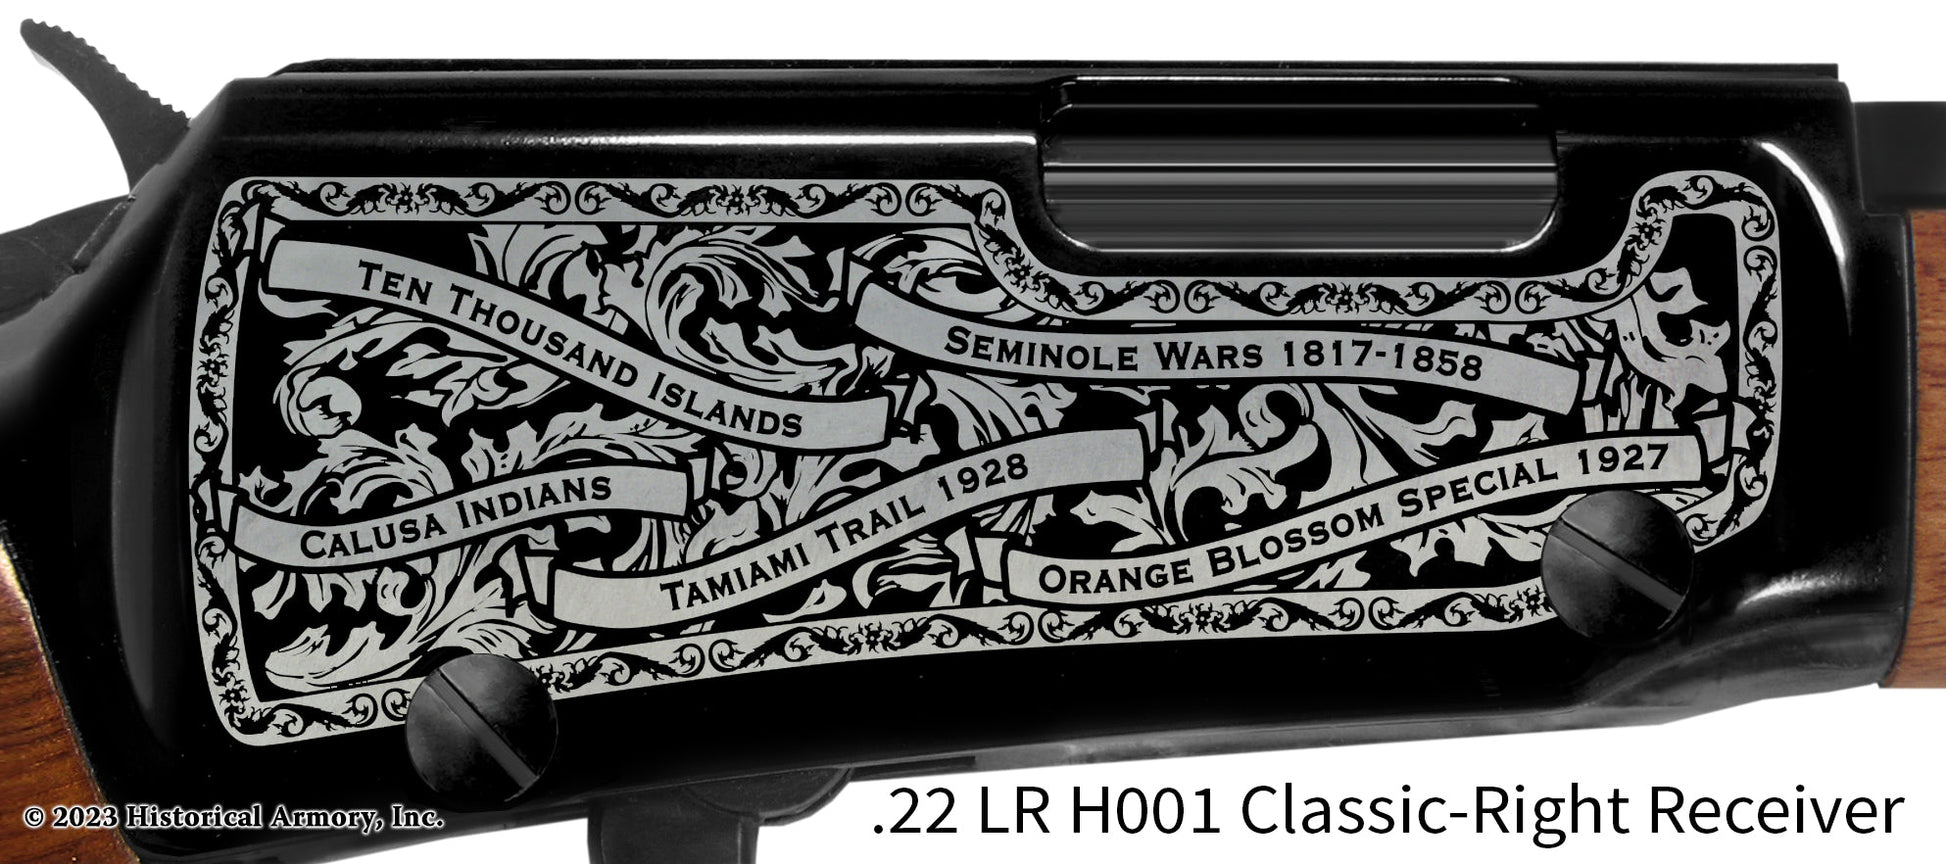 Collier County Florida Engraved Henry H001 Rifle